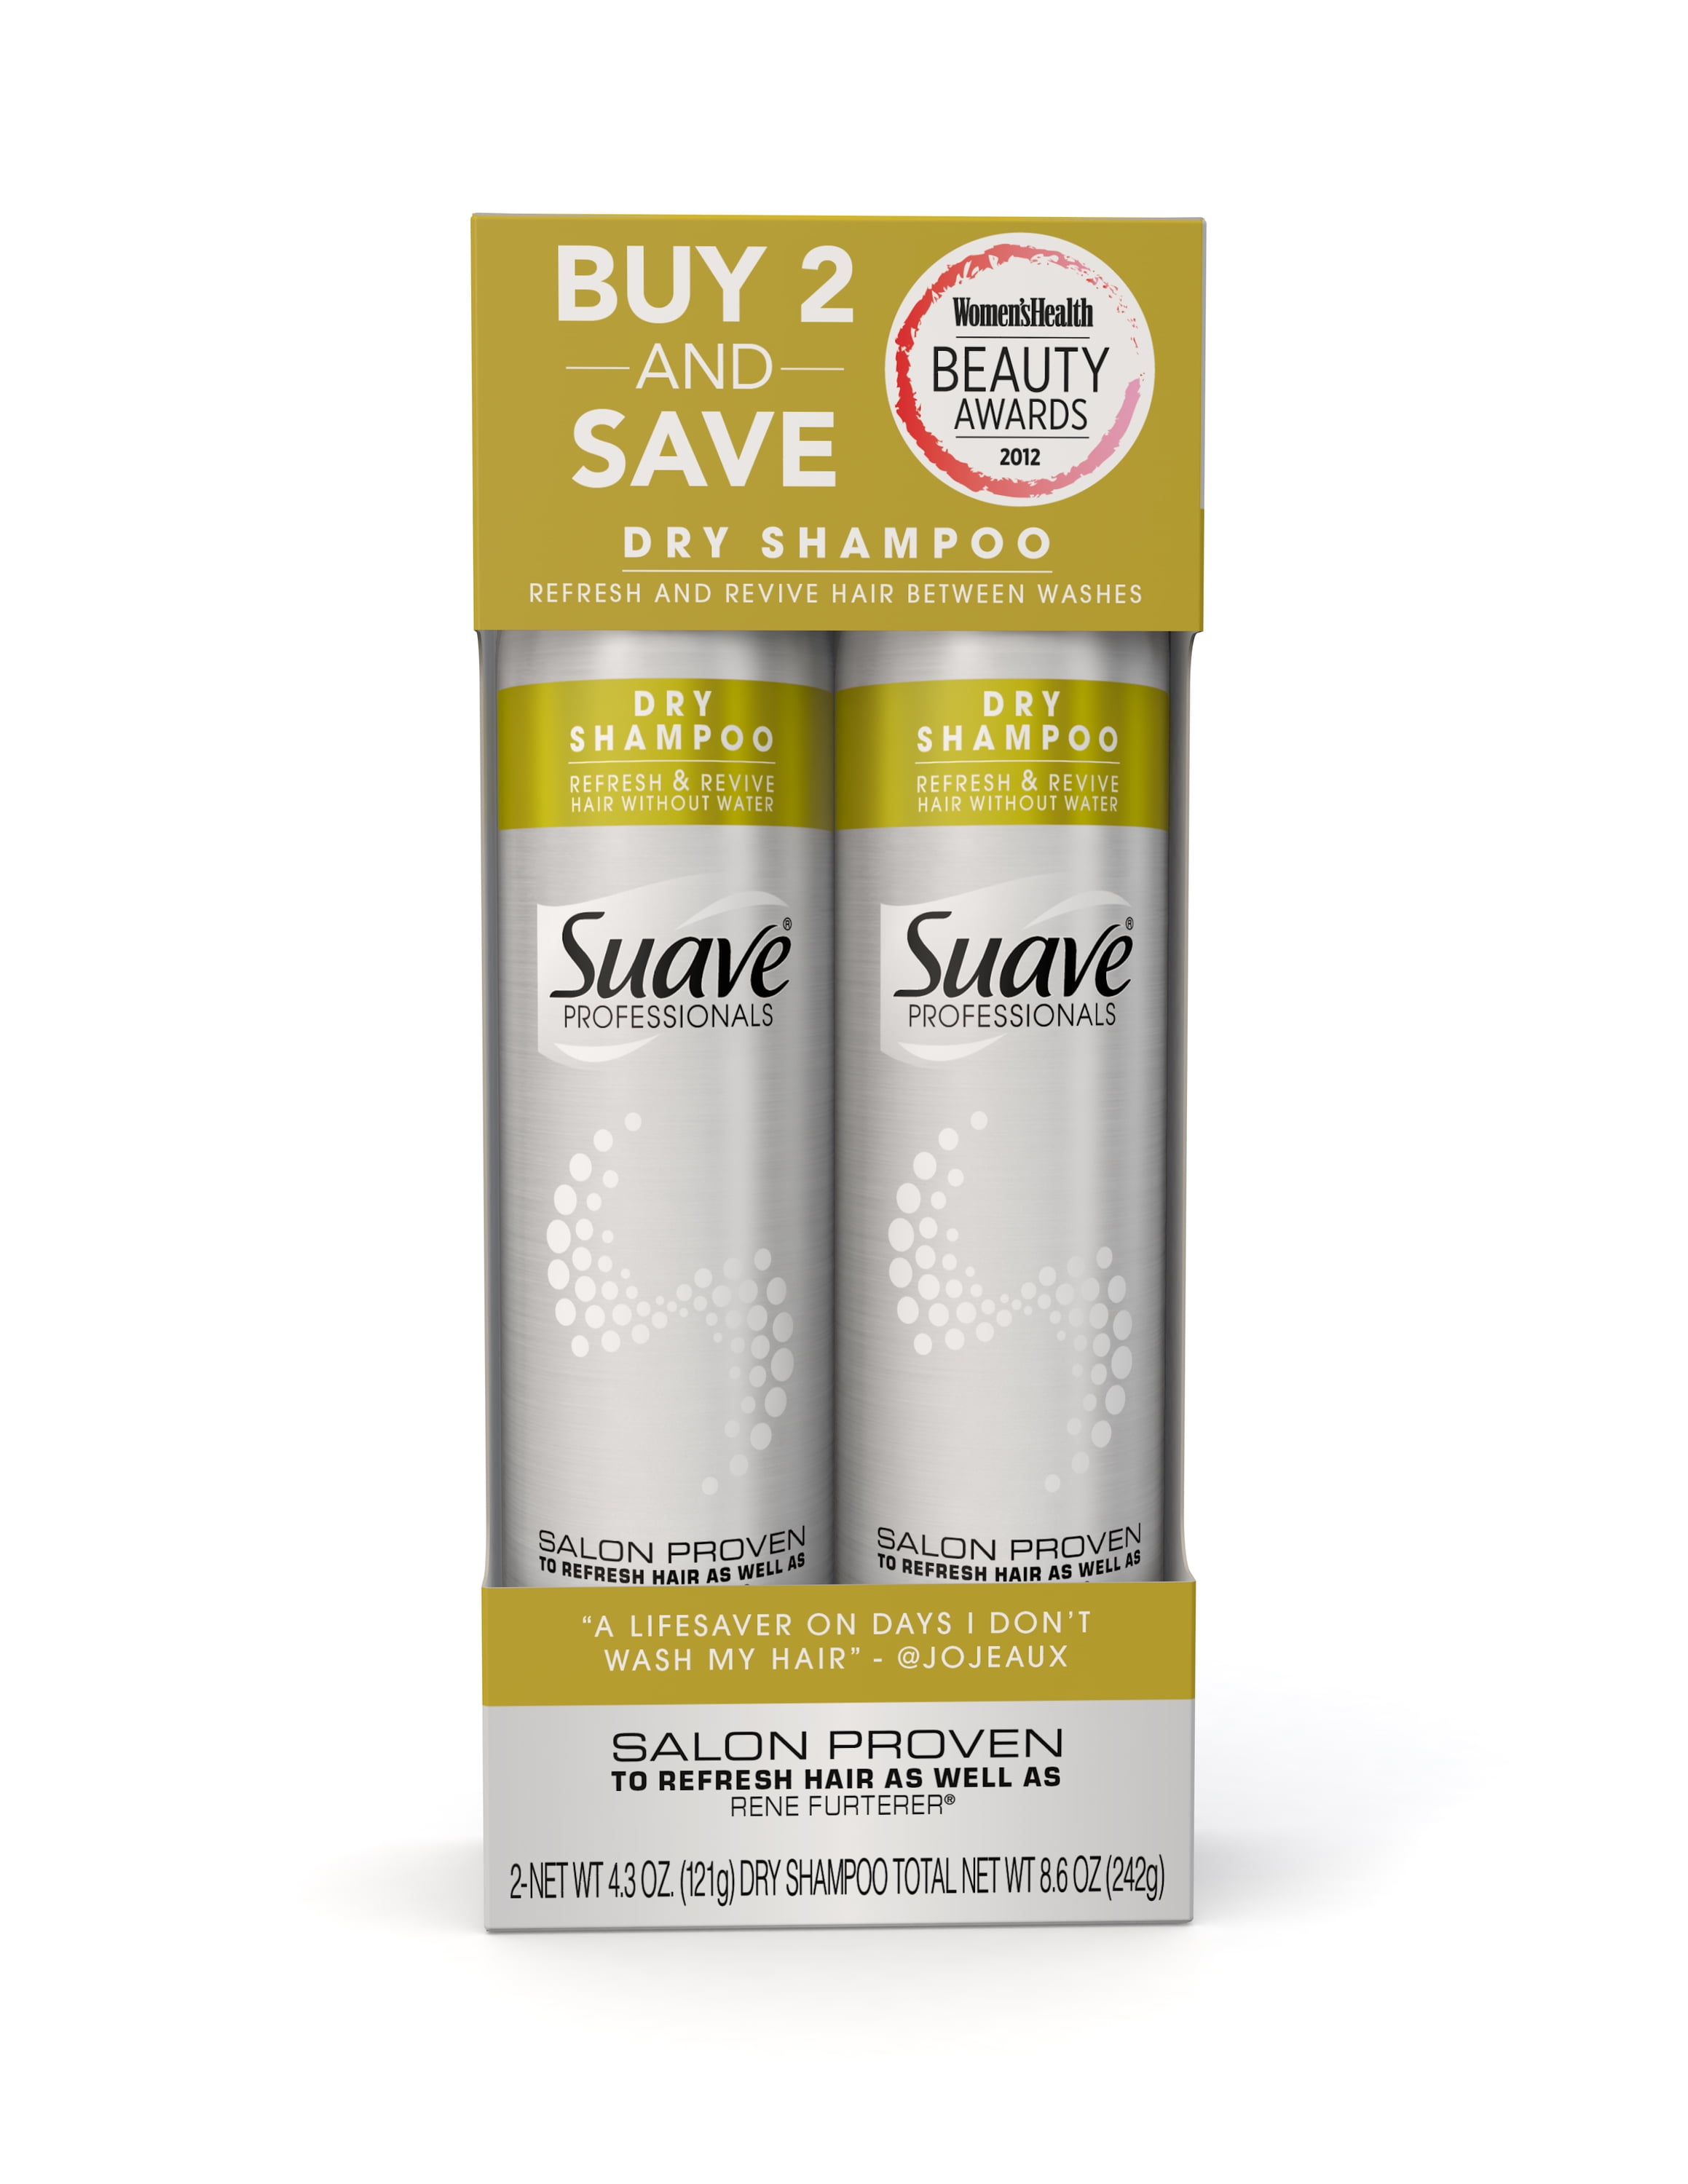 Suave Professionals Dry Shampoo Refresh and Revive oz, Twin Pack